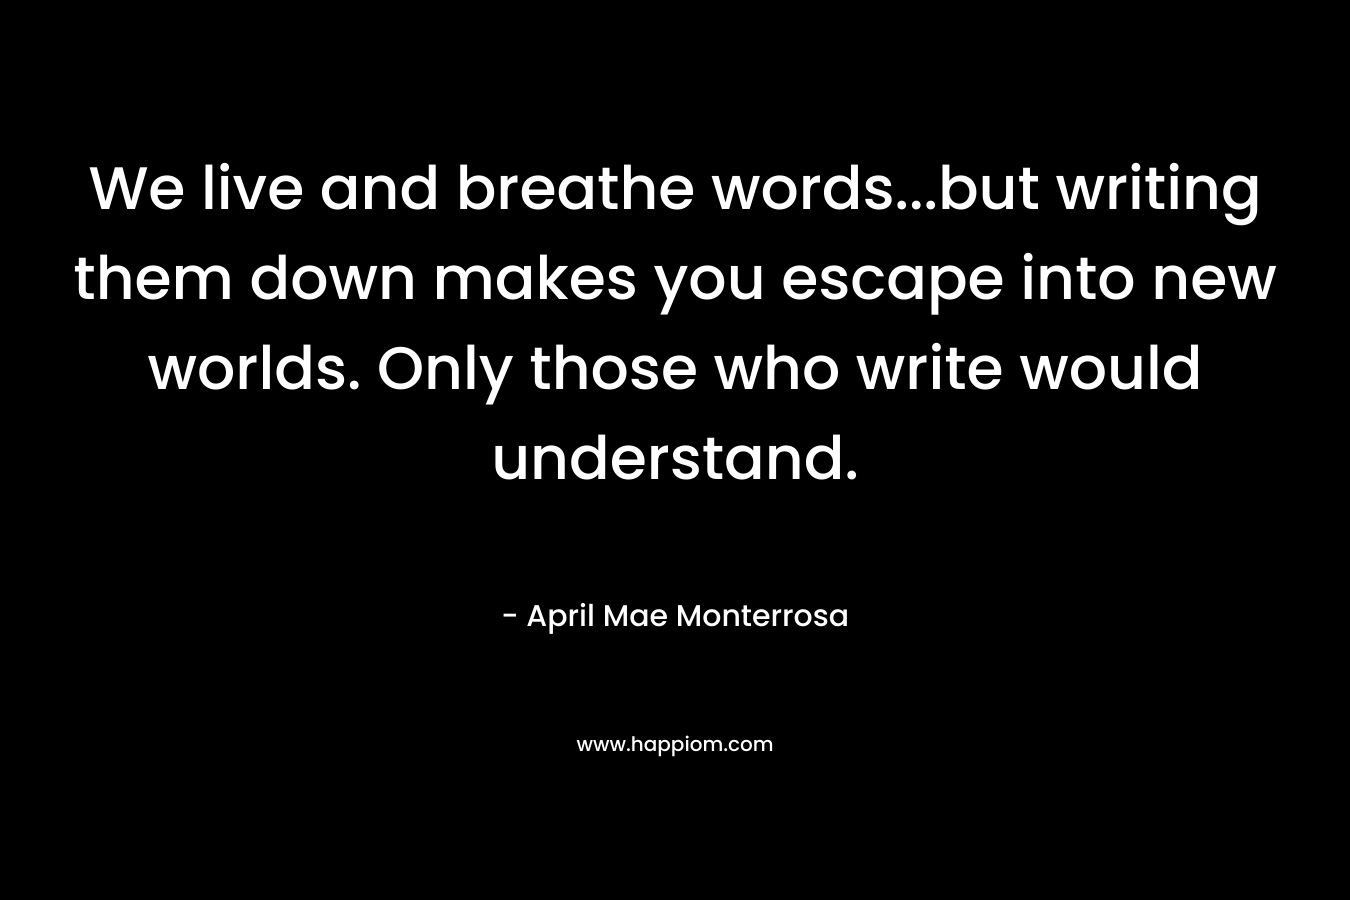 We live and breathe words...but writing them down makes you escape into new worlds. Only those who write would understand.